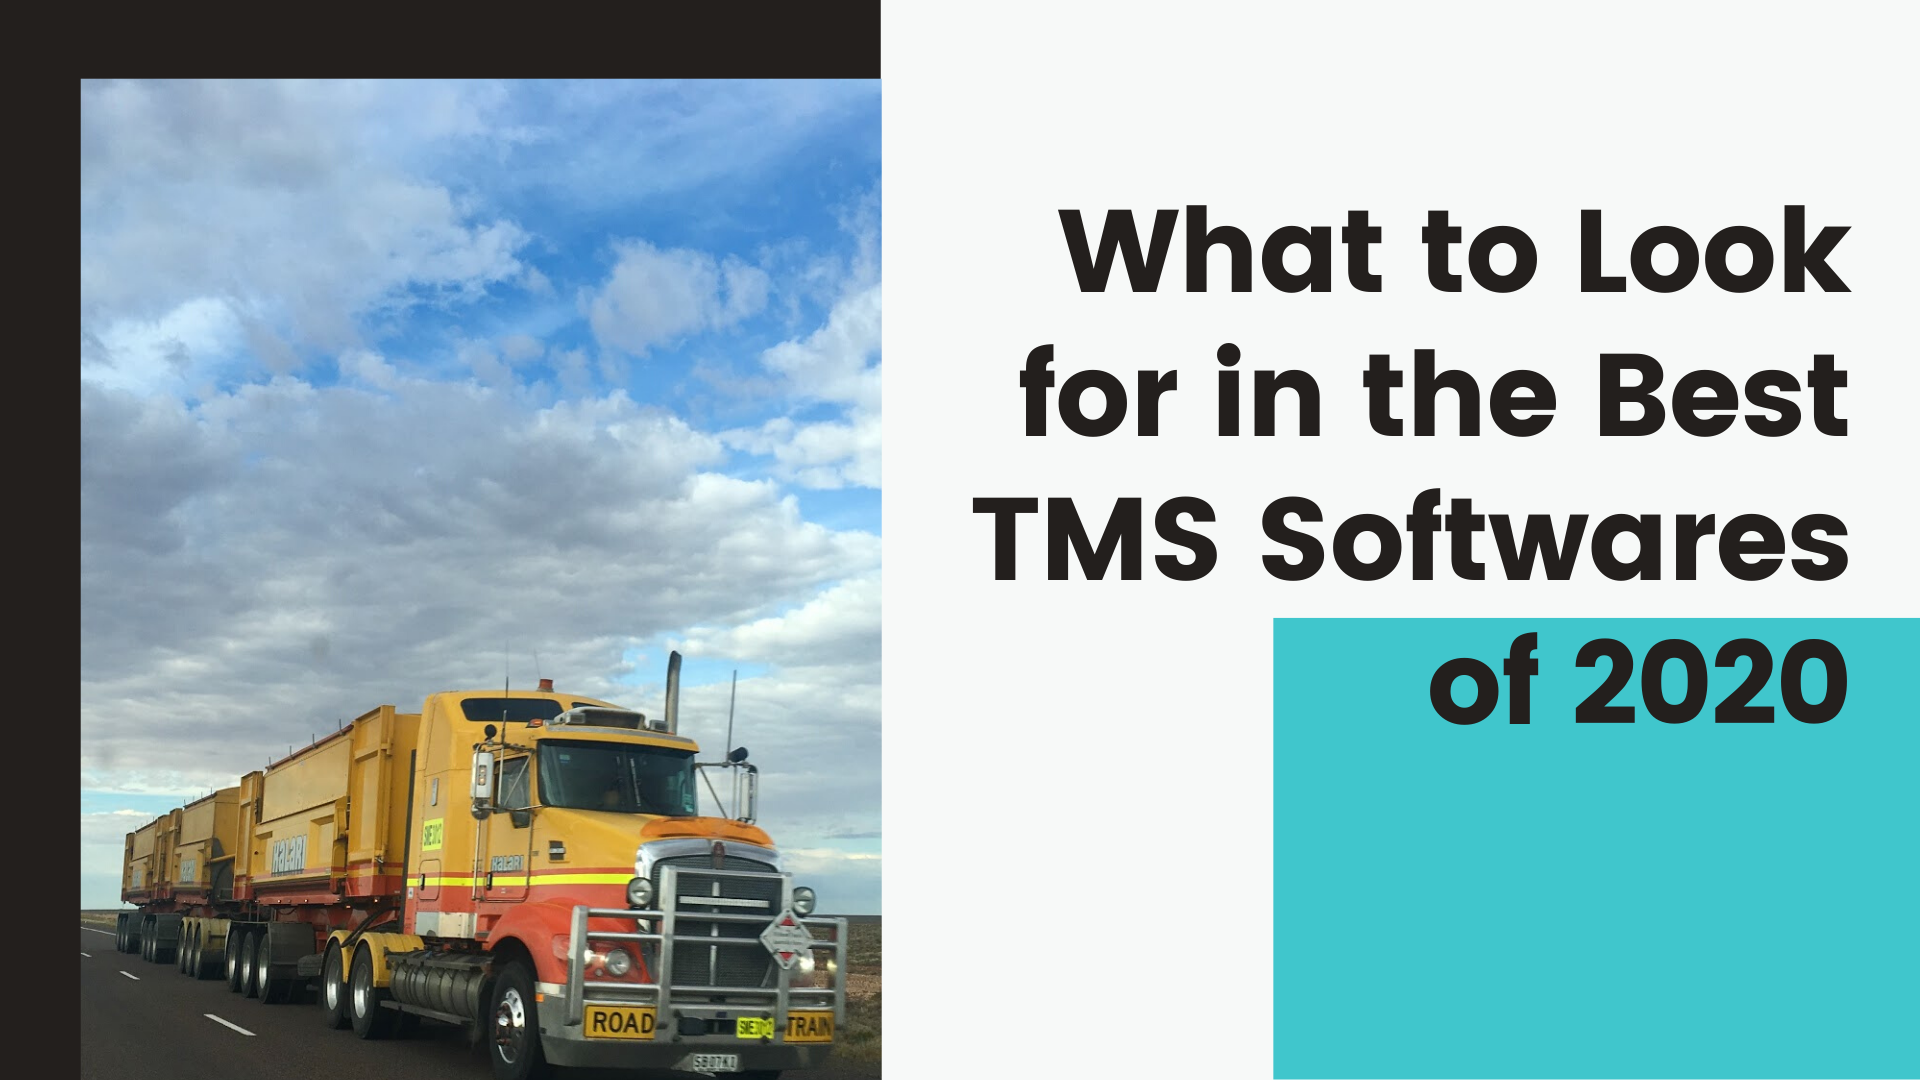 What to Look for in the Best TMS Softwares of 2020